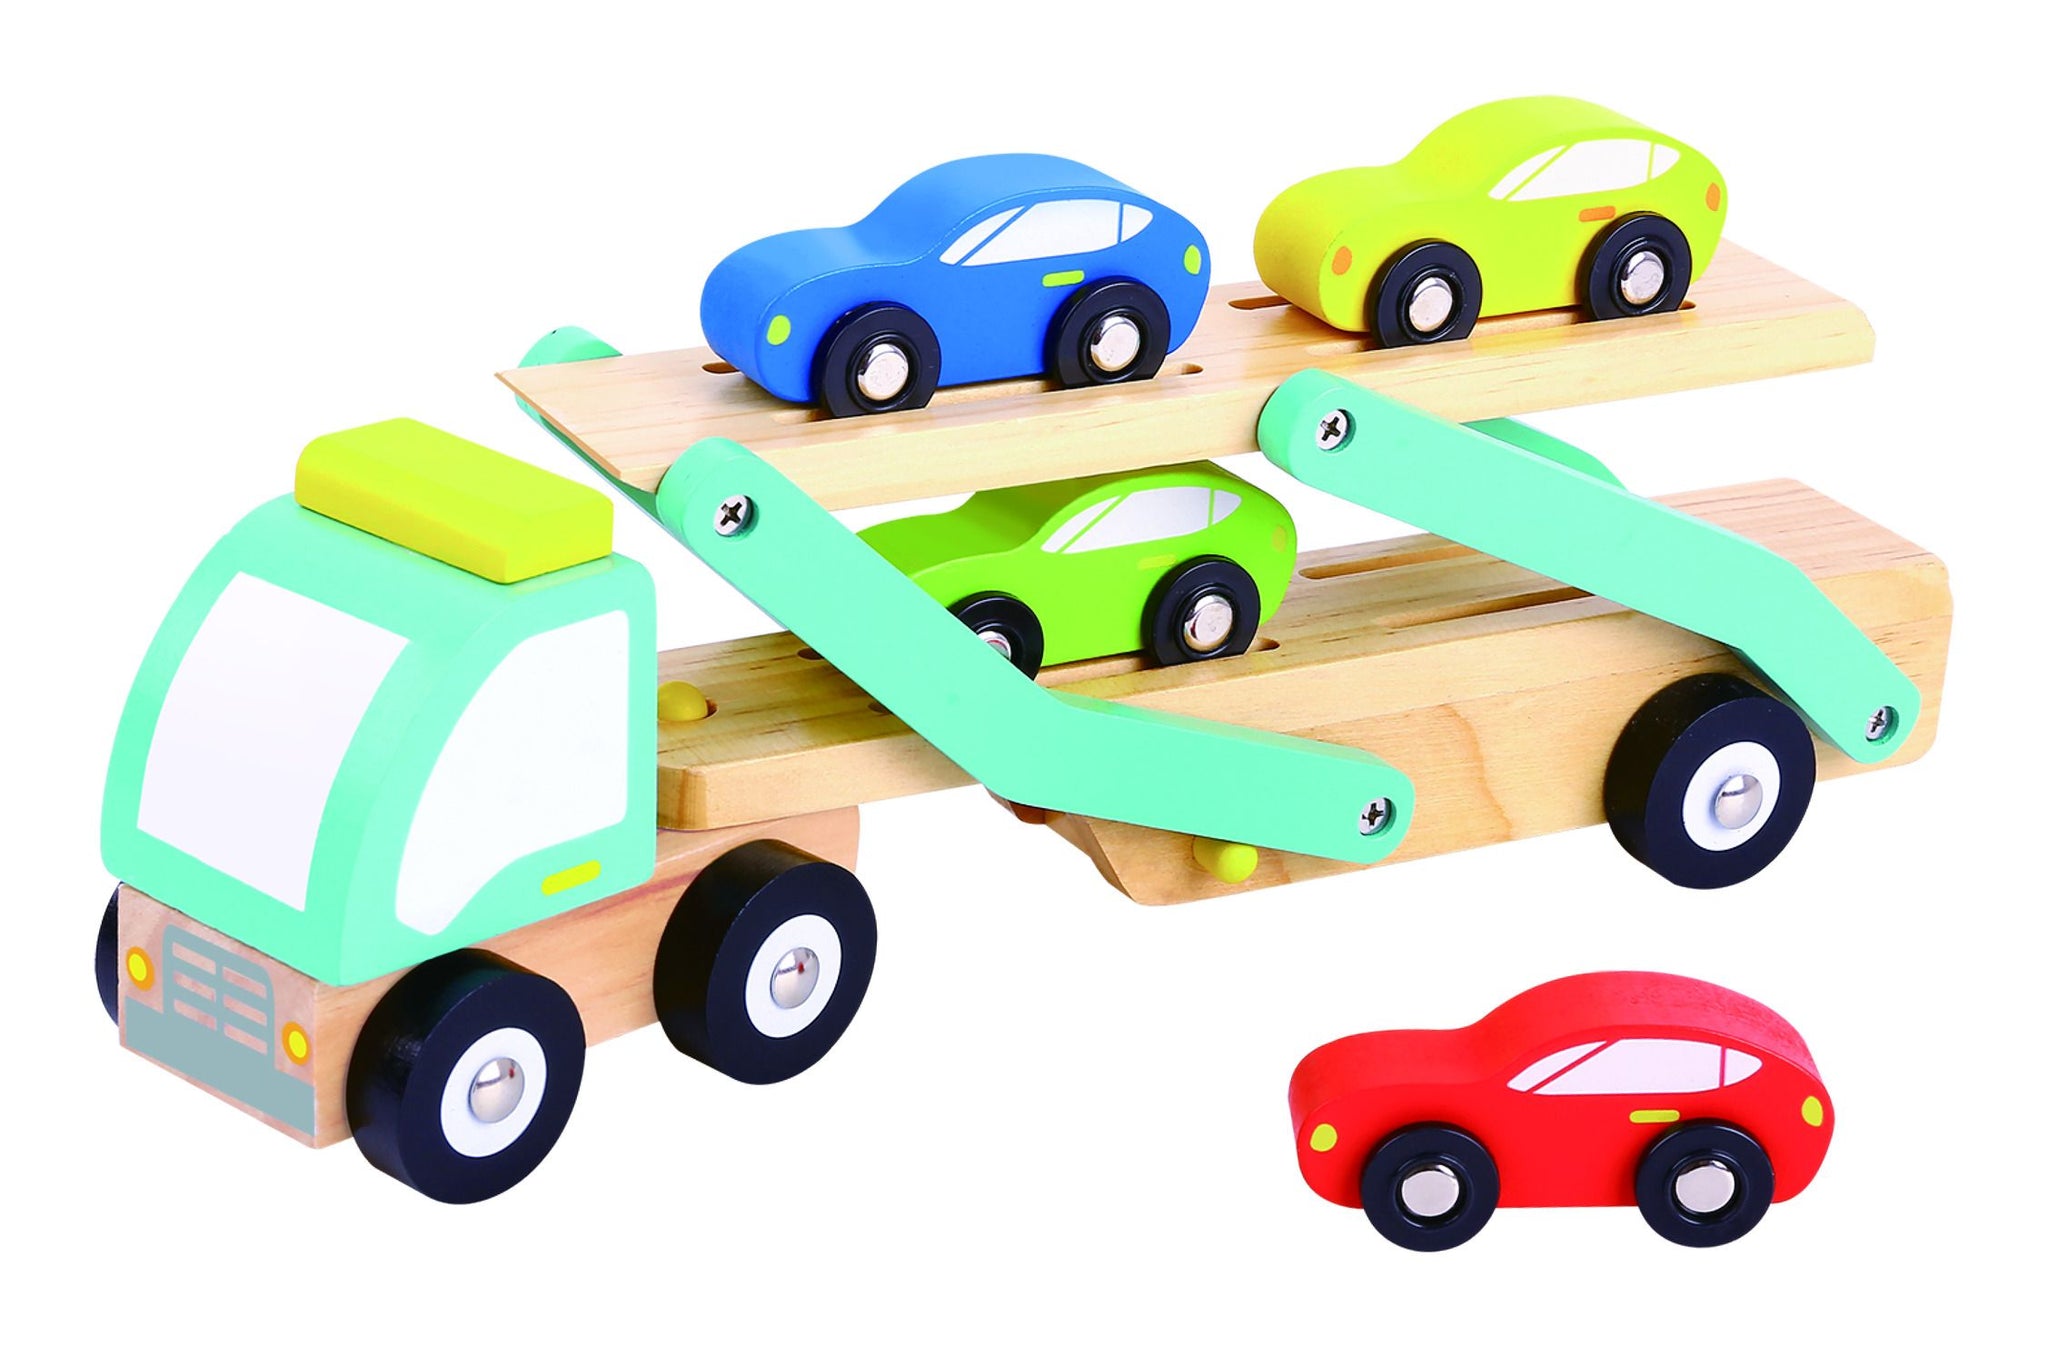 Tooky Toy Wooden Car Carrier